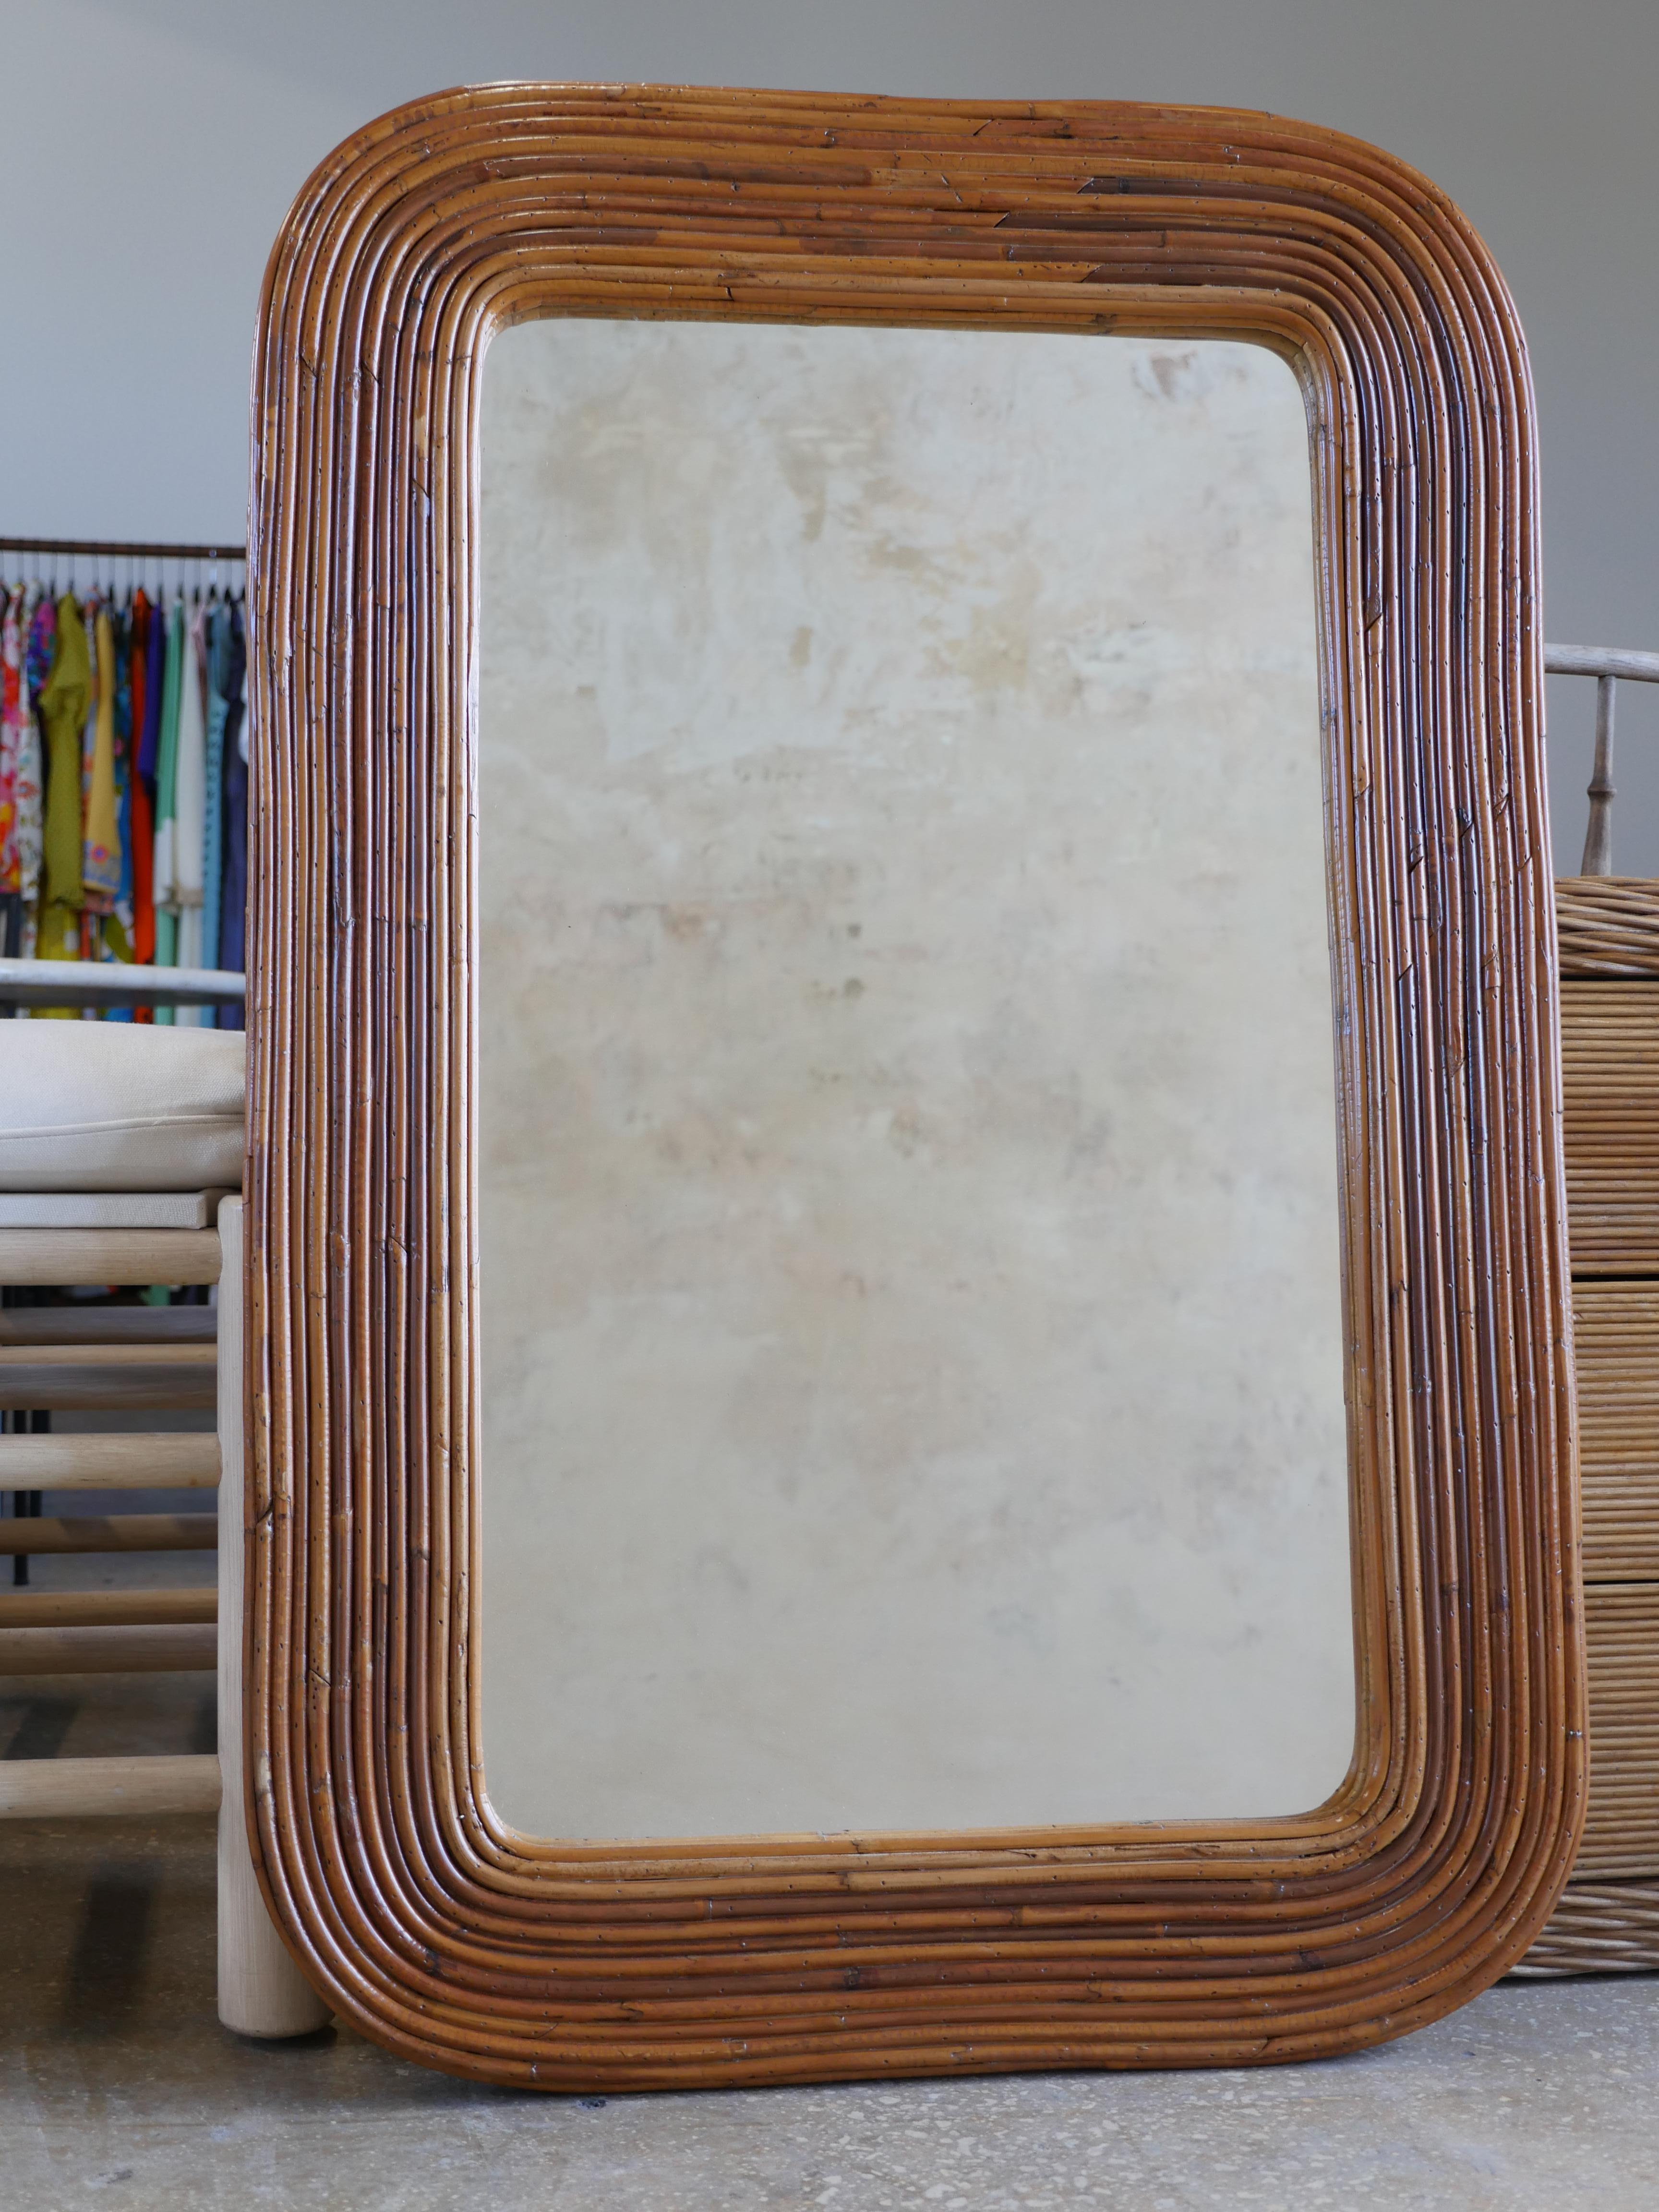 Vintage pencil reed rattan racetrack mirror. The rattan has been refinished in a natural stain, and contains beautiful variations of warm wood tones throughout the mirror.